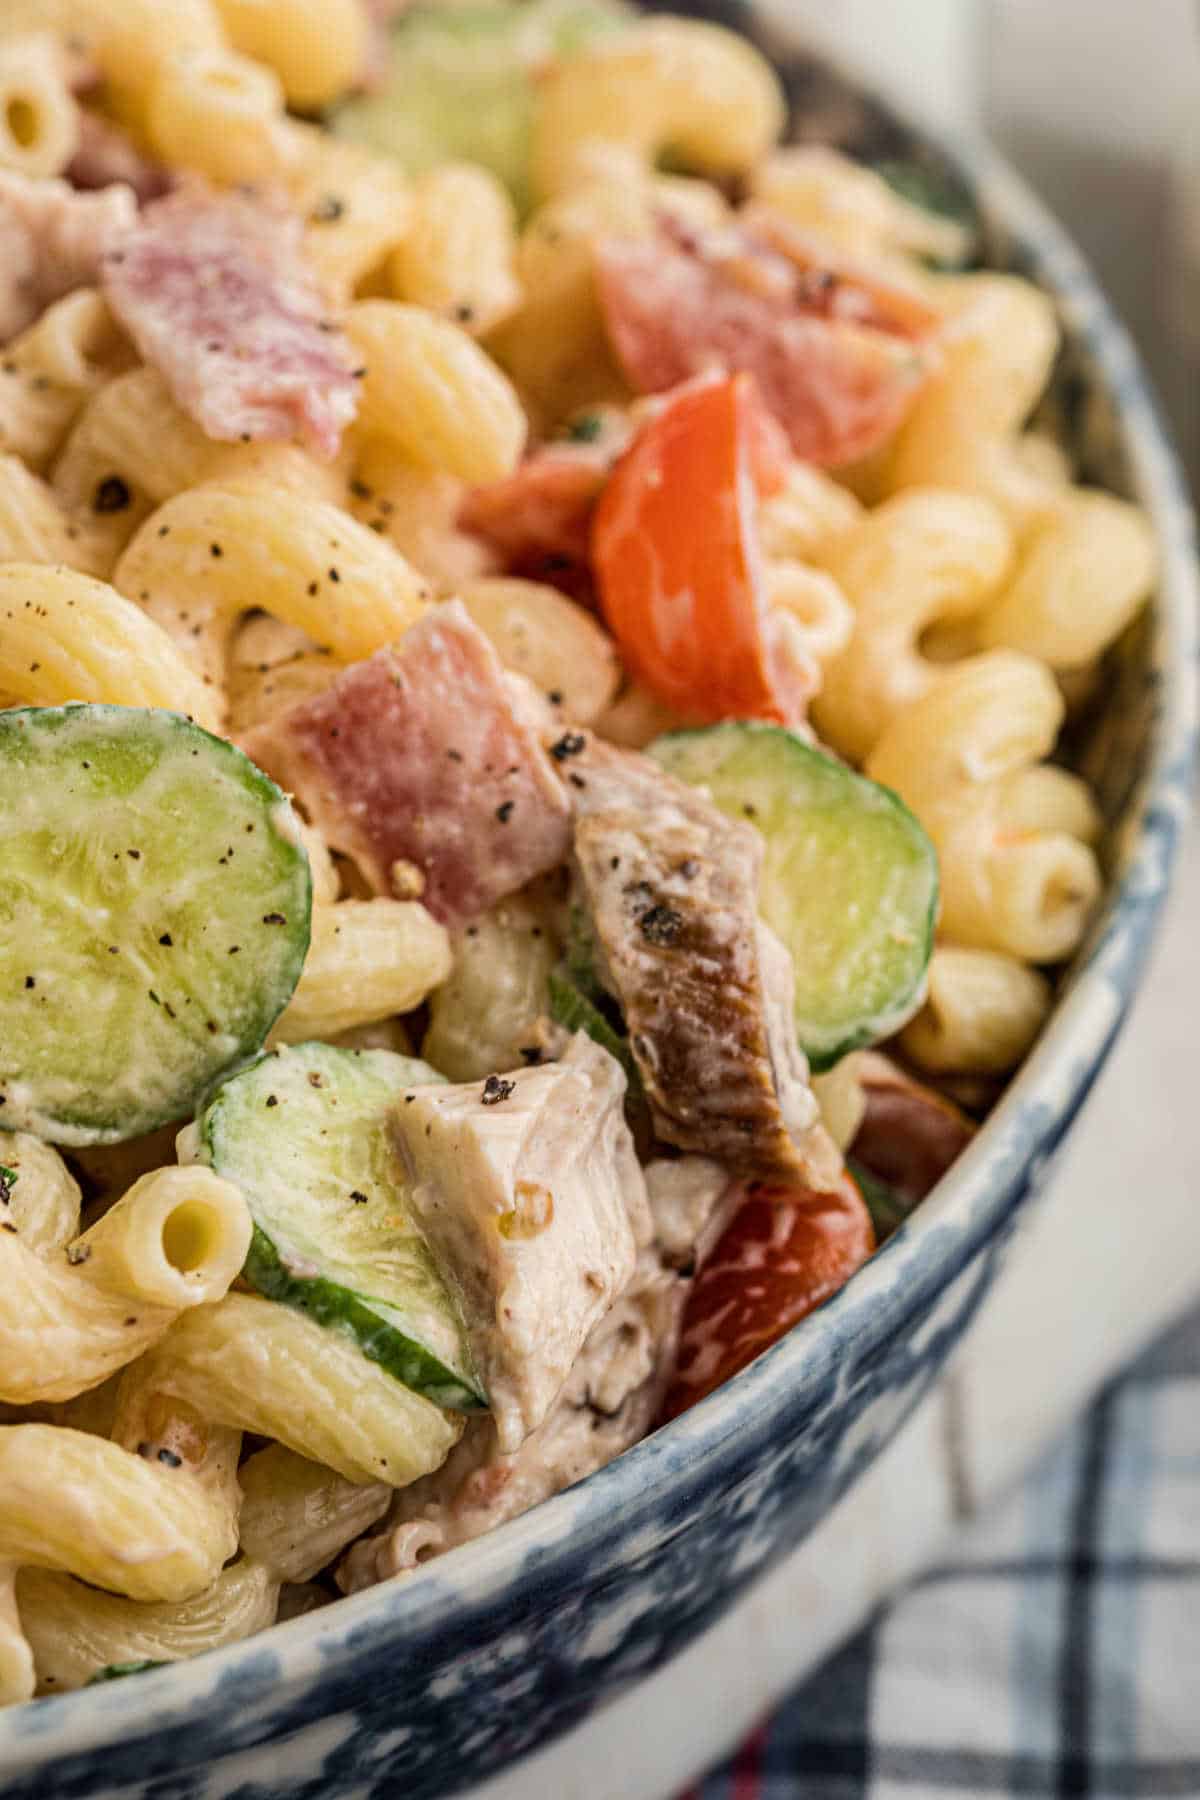 Super close up picture of a pasta salad, with chicken and bacon, in a blue bowl.